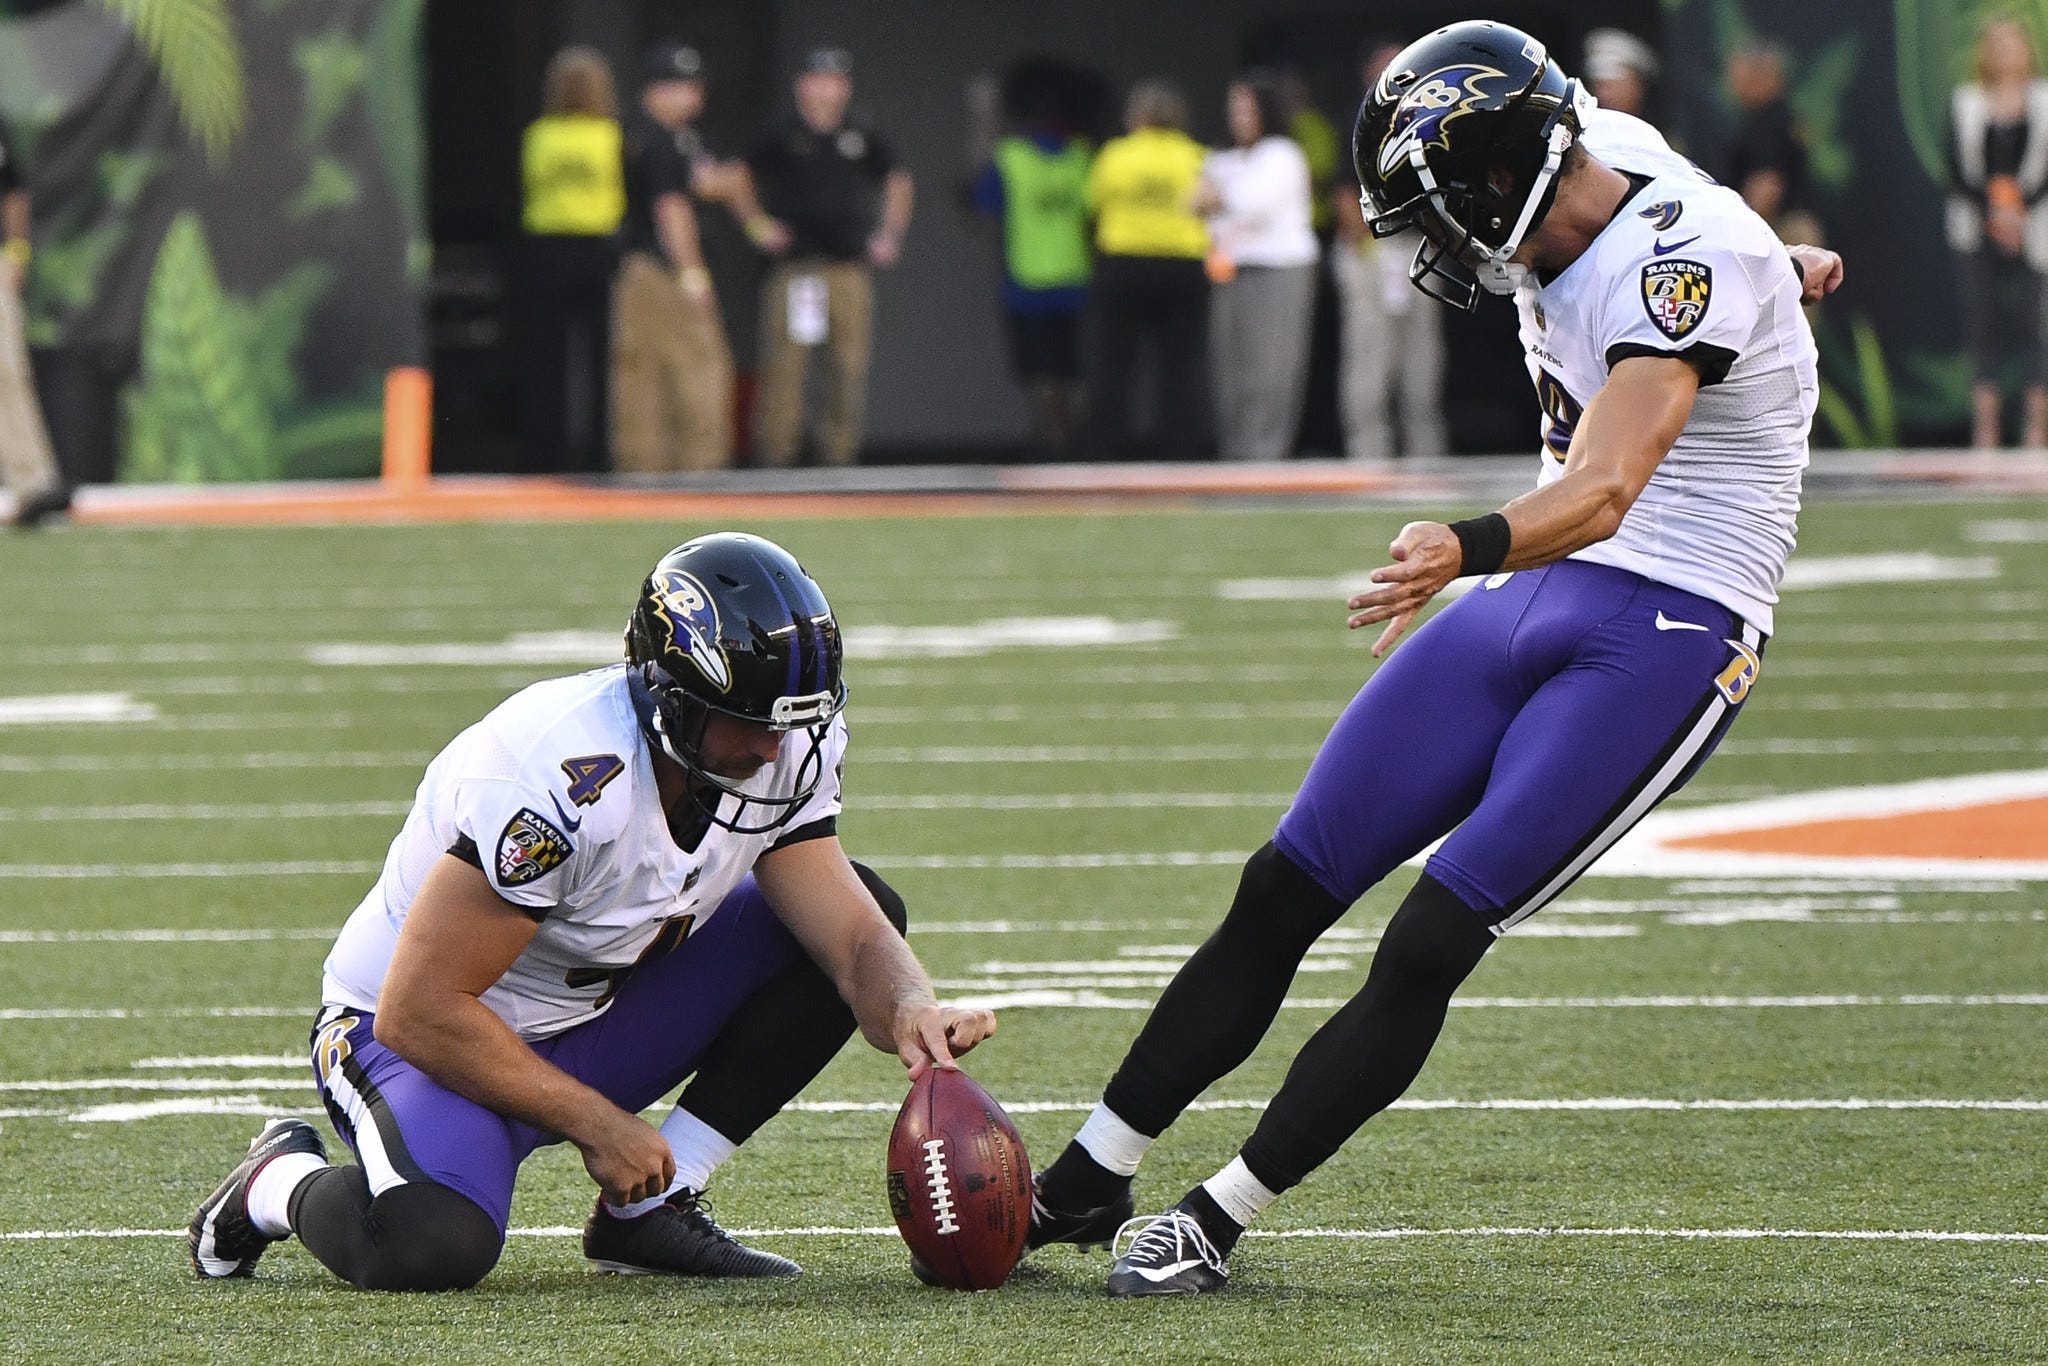 Ranking the Ravens Uniforms - by Brian Griffiths